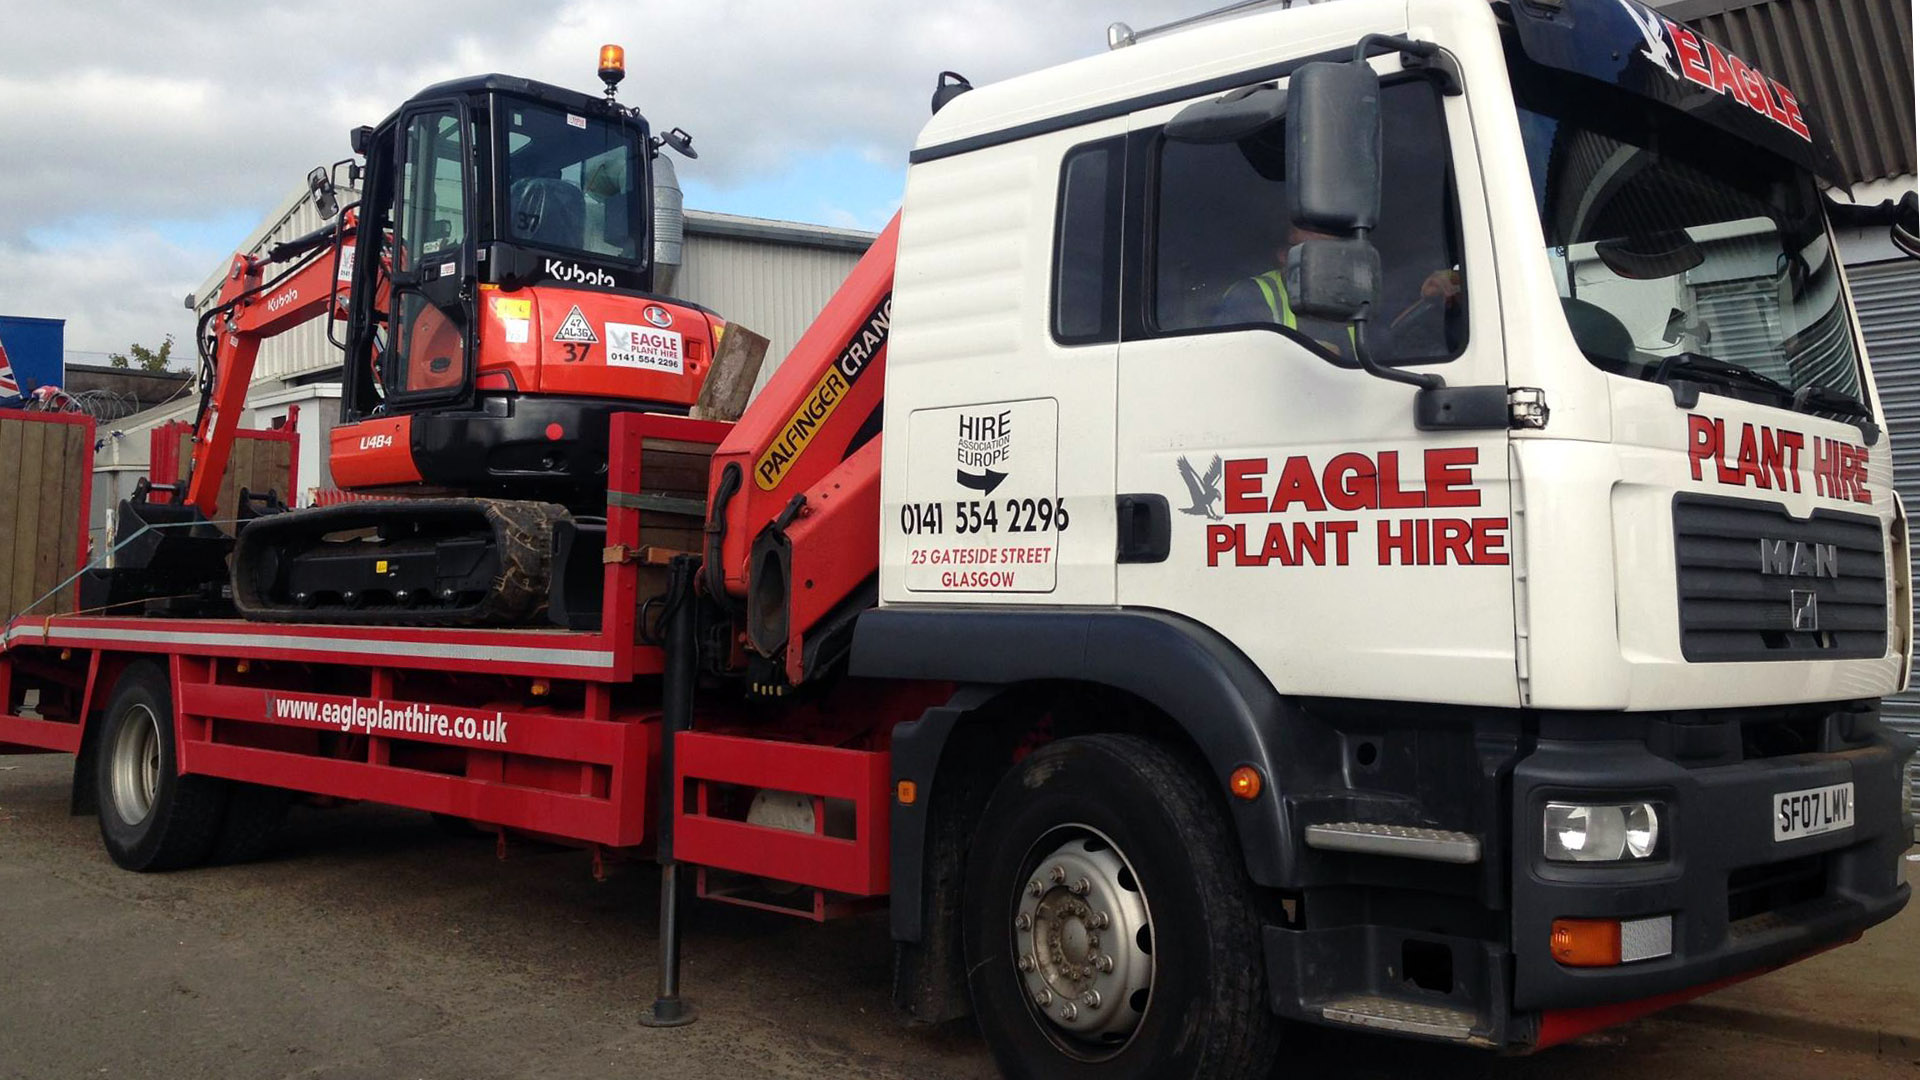 An Eagle Plant Hire truck/trailer is loaded and ready to deliver.